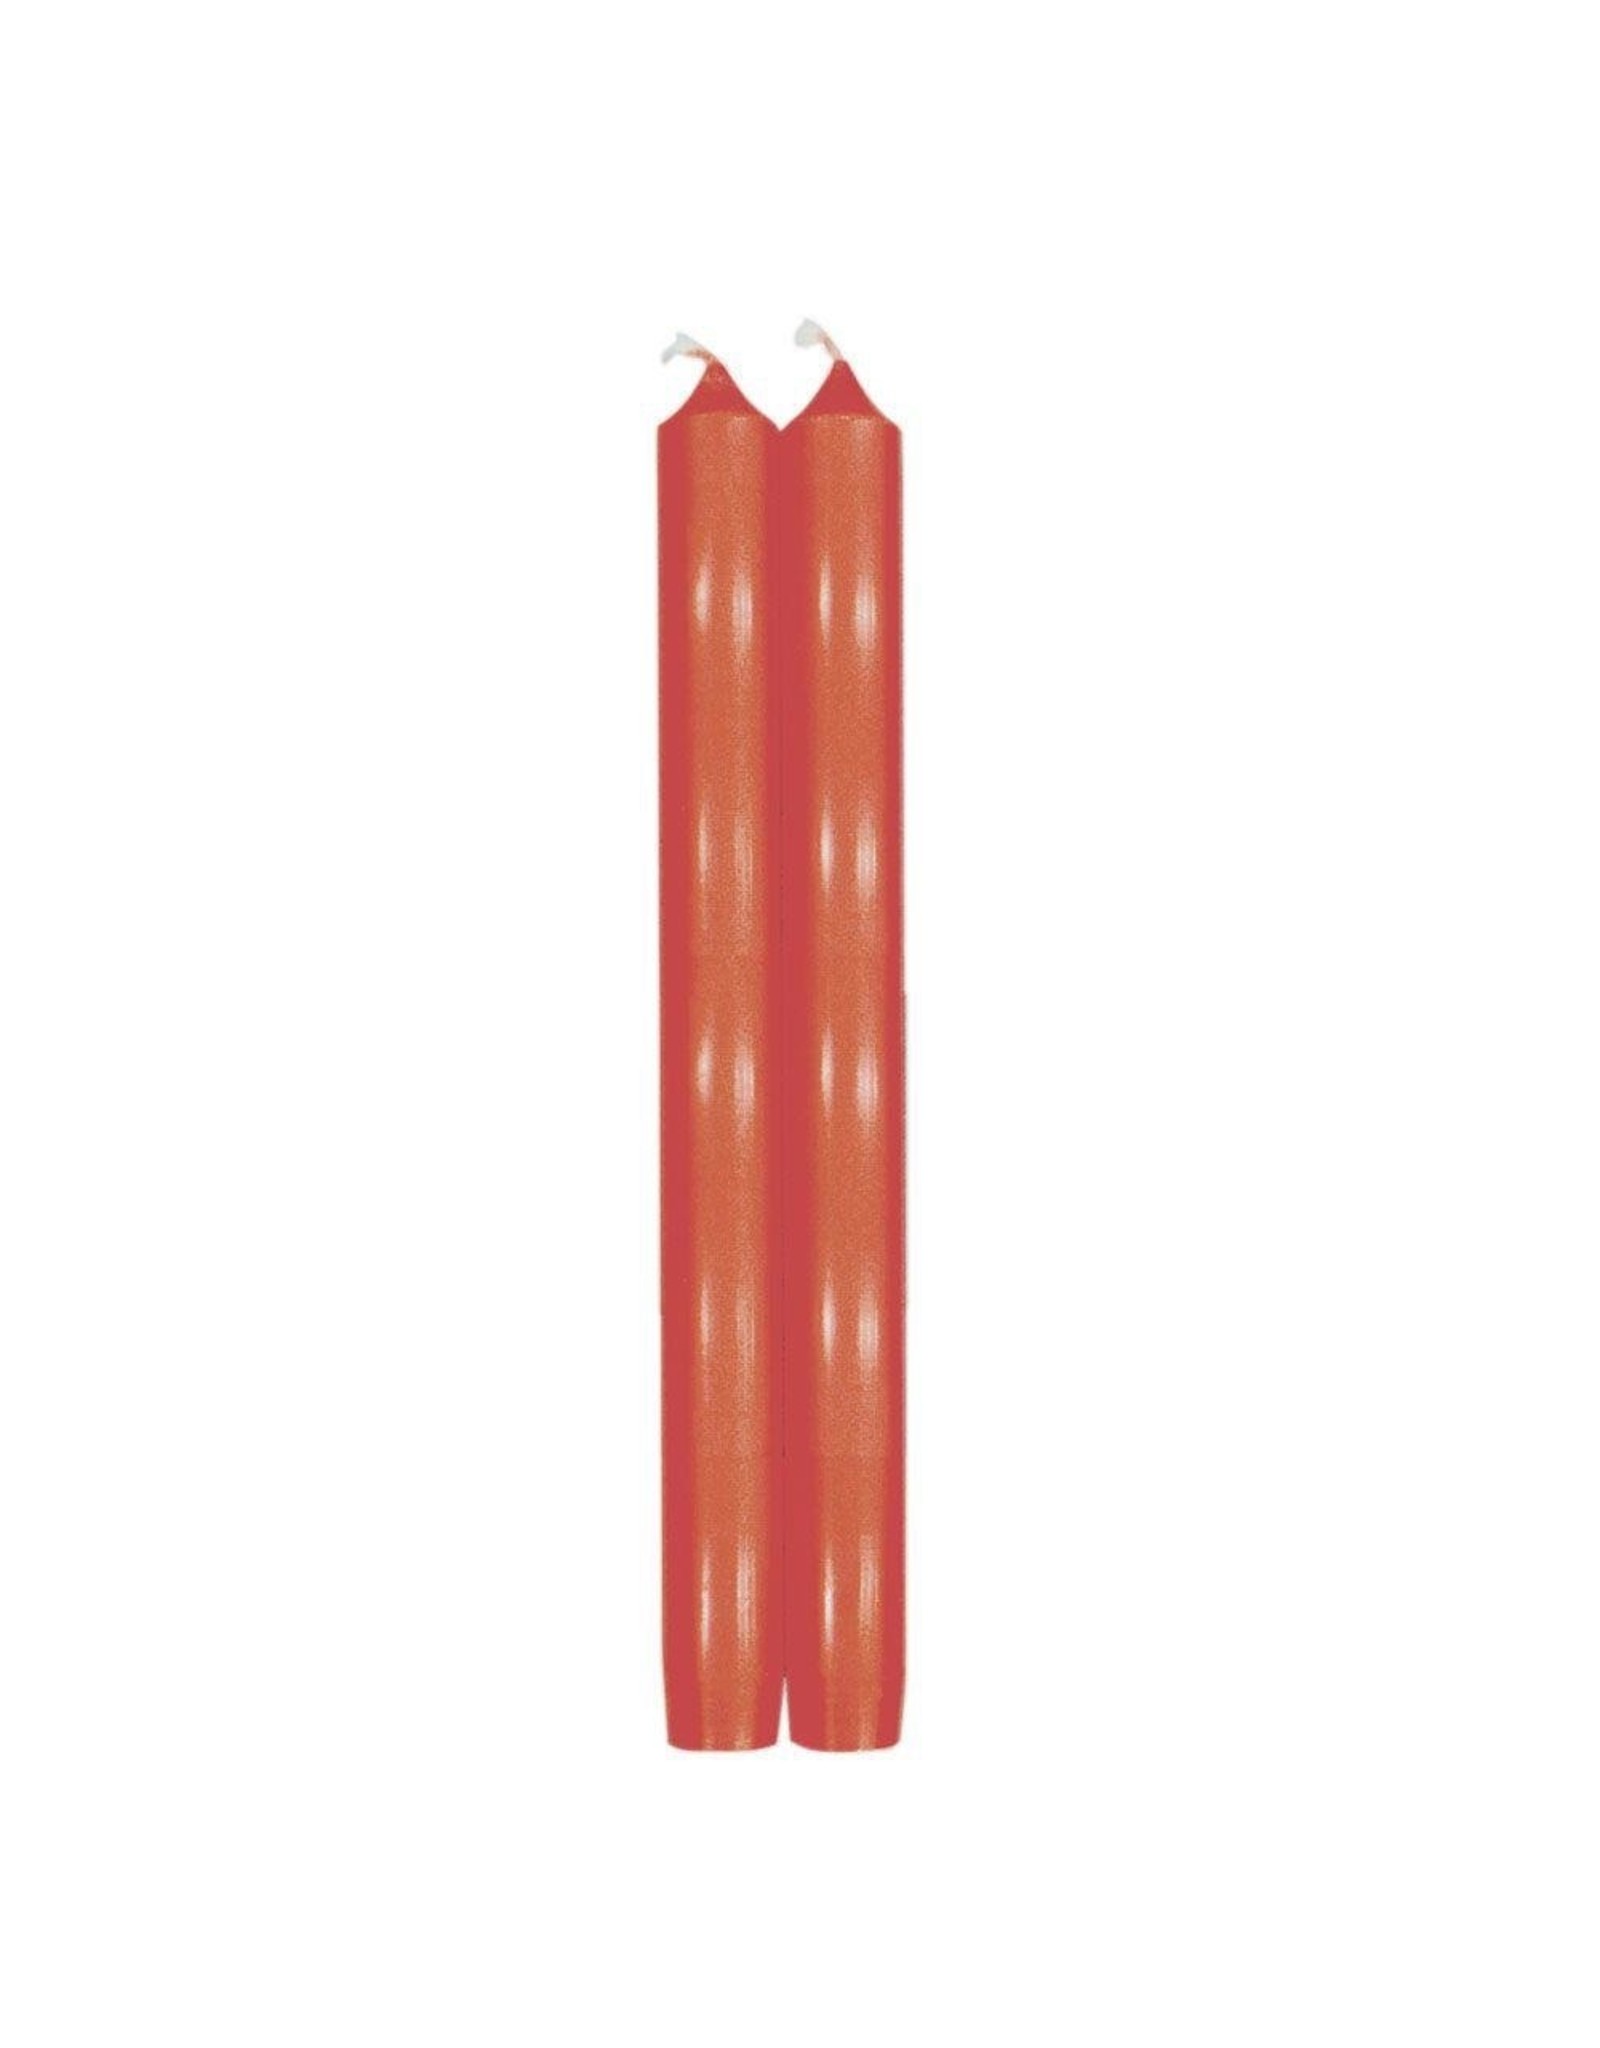 Caspari Crown Candles Tapers 10 inch 2pk Spice